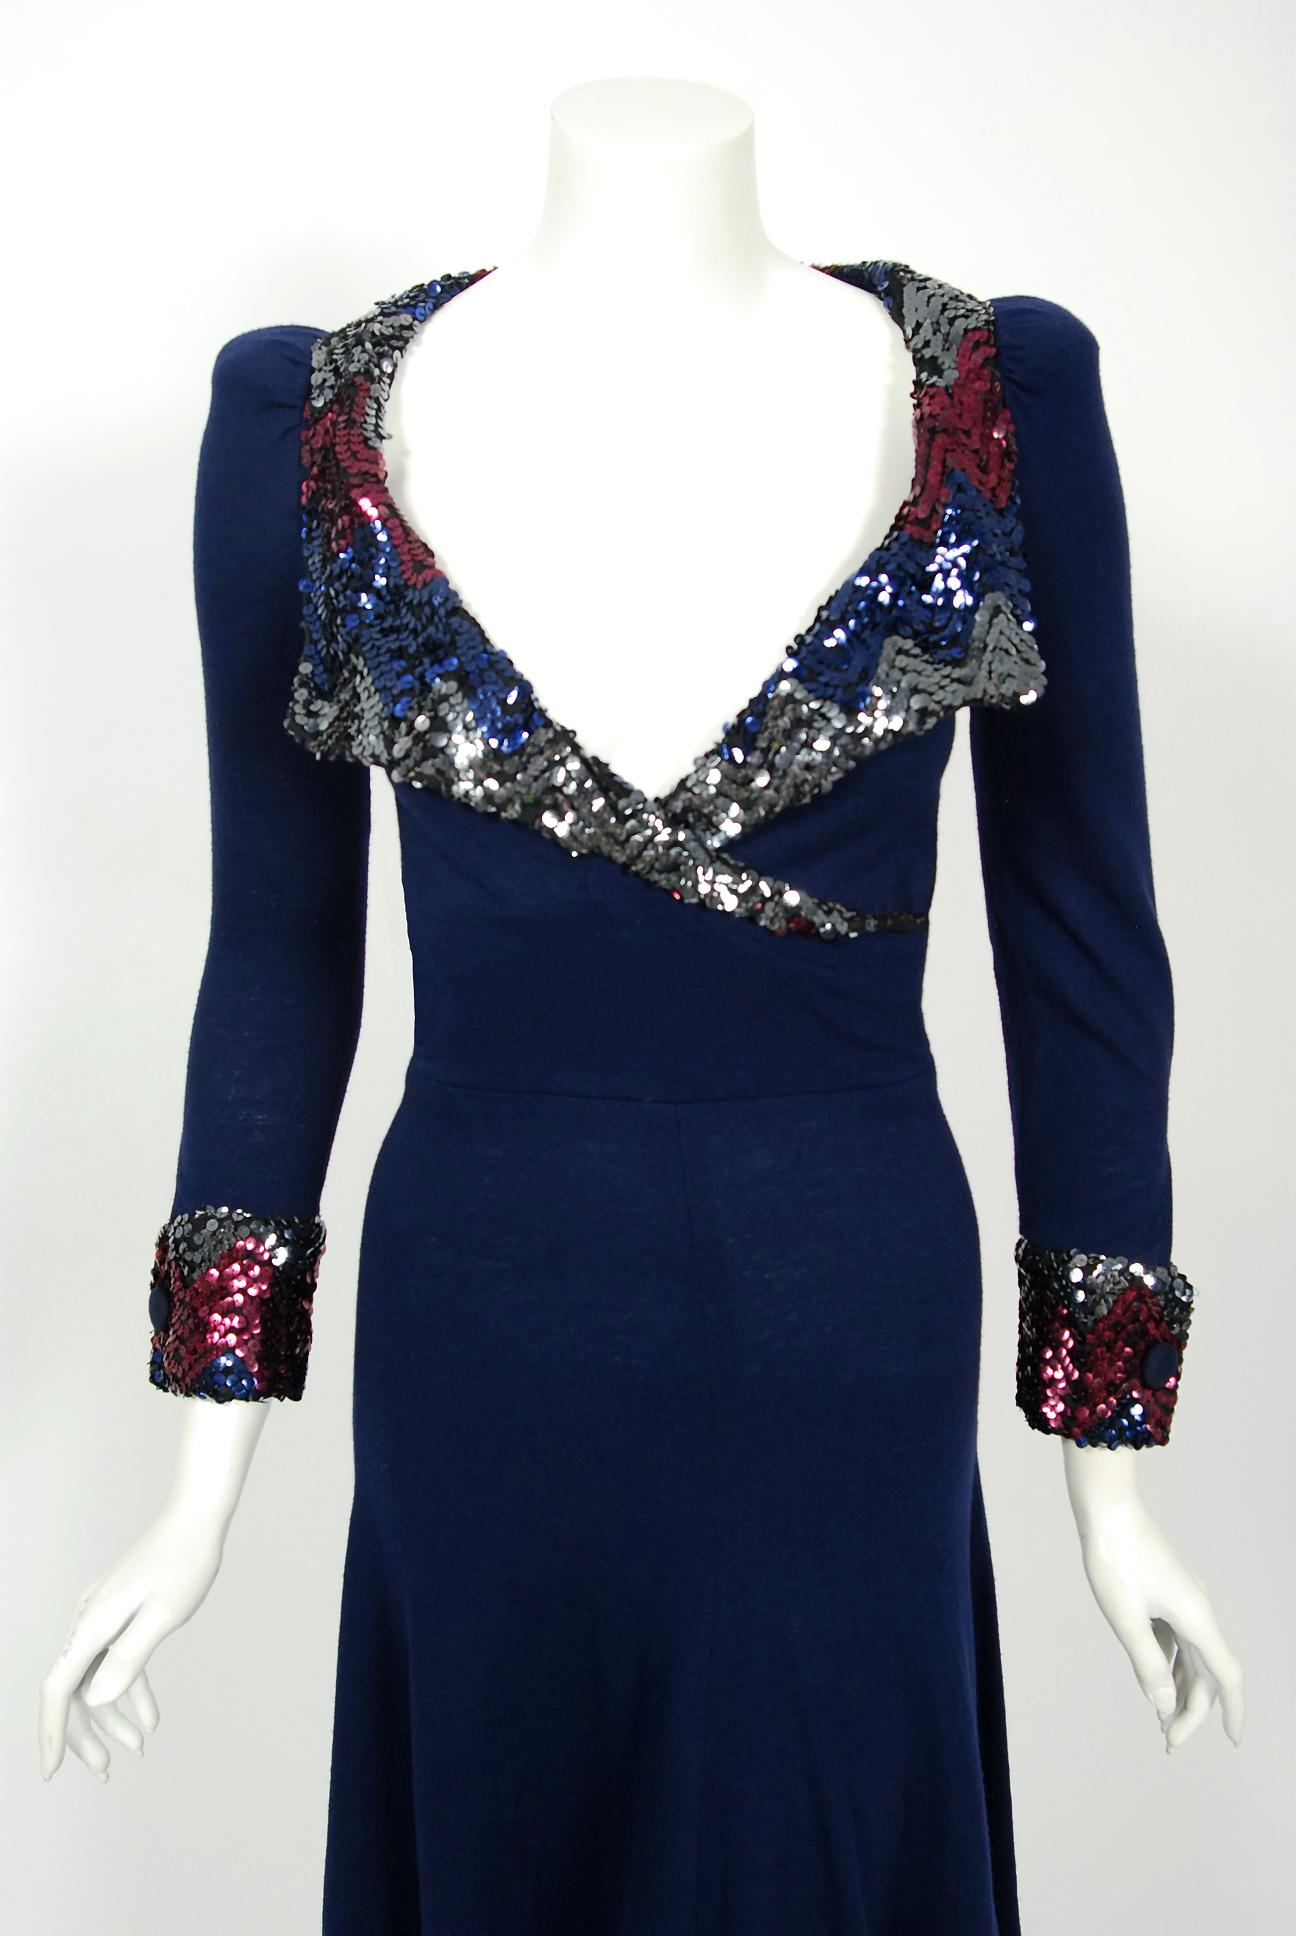 If you were an “It Girl” in London during the 1960's and 1970's, Biba is where you would have shopped. This sensational navy-blue swool dress, dating back to 1973, is a perfect example of the brand's genius. The fabric has a flattering stretch with